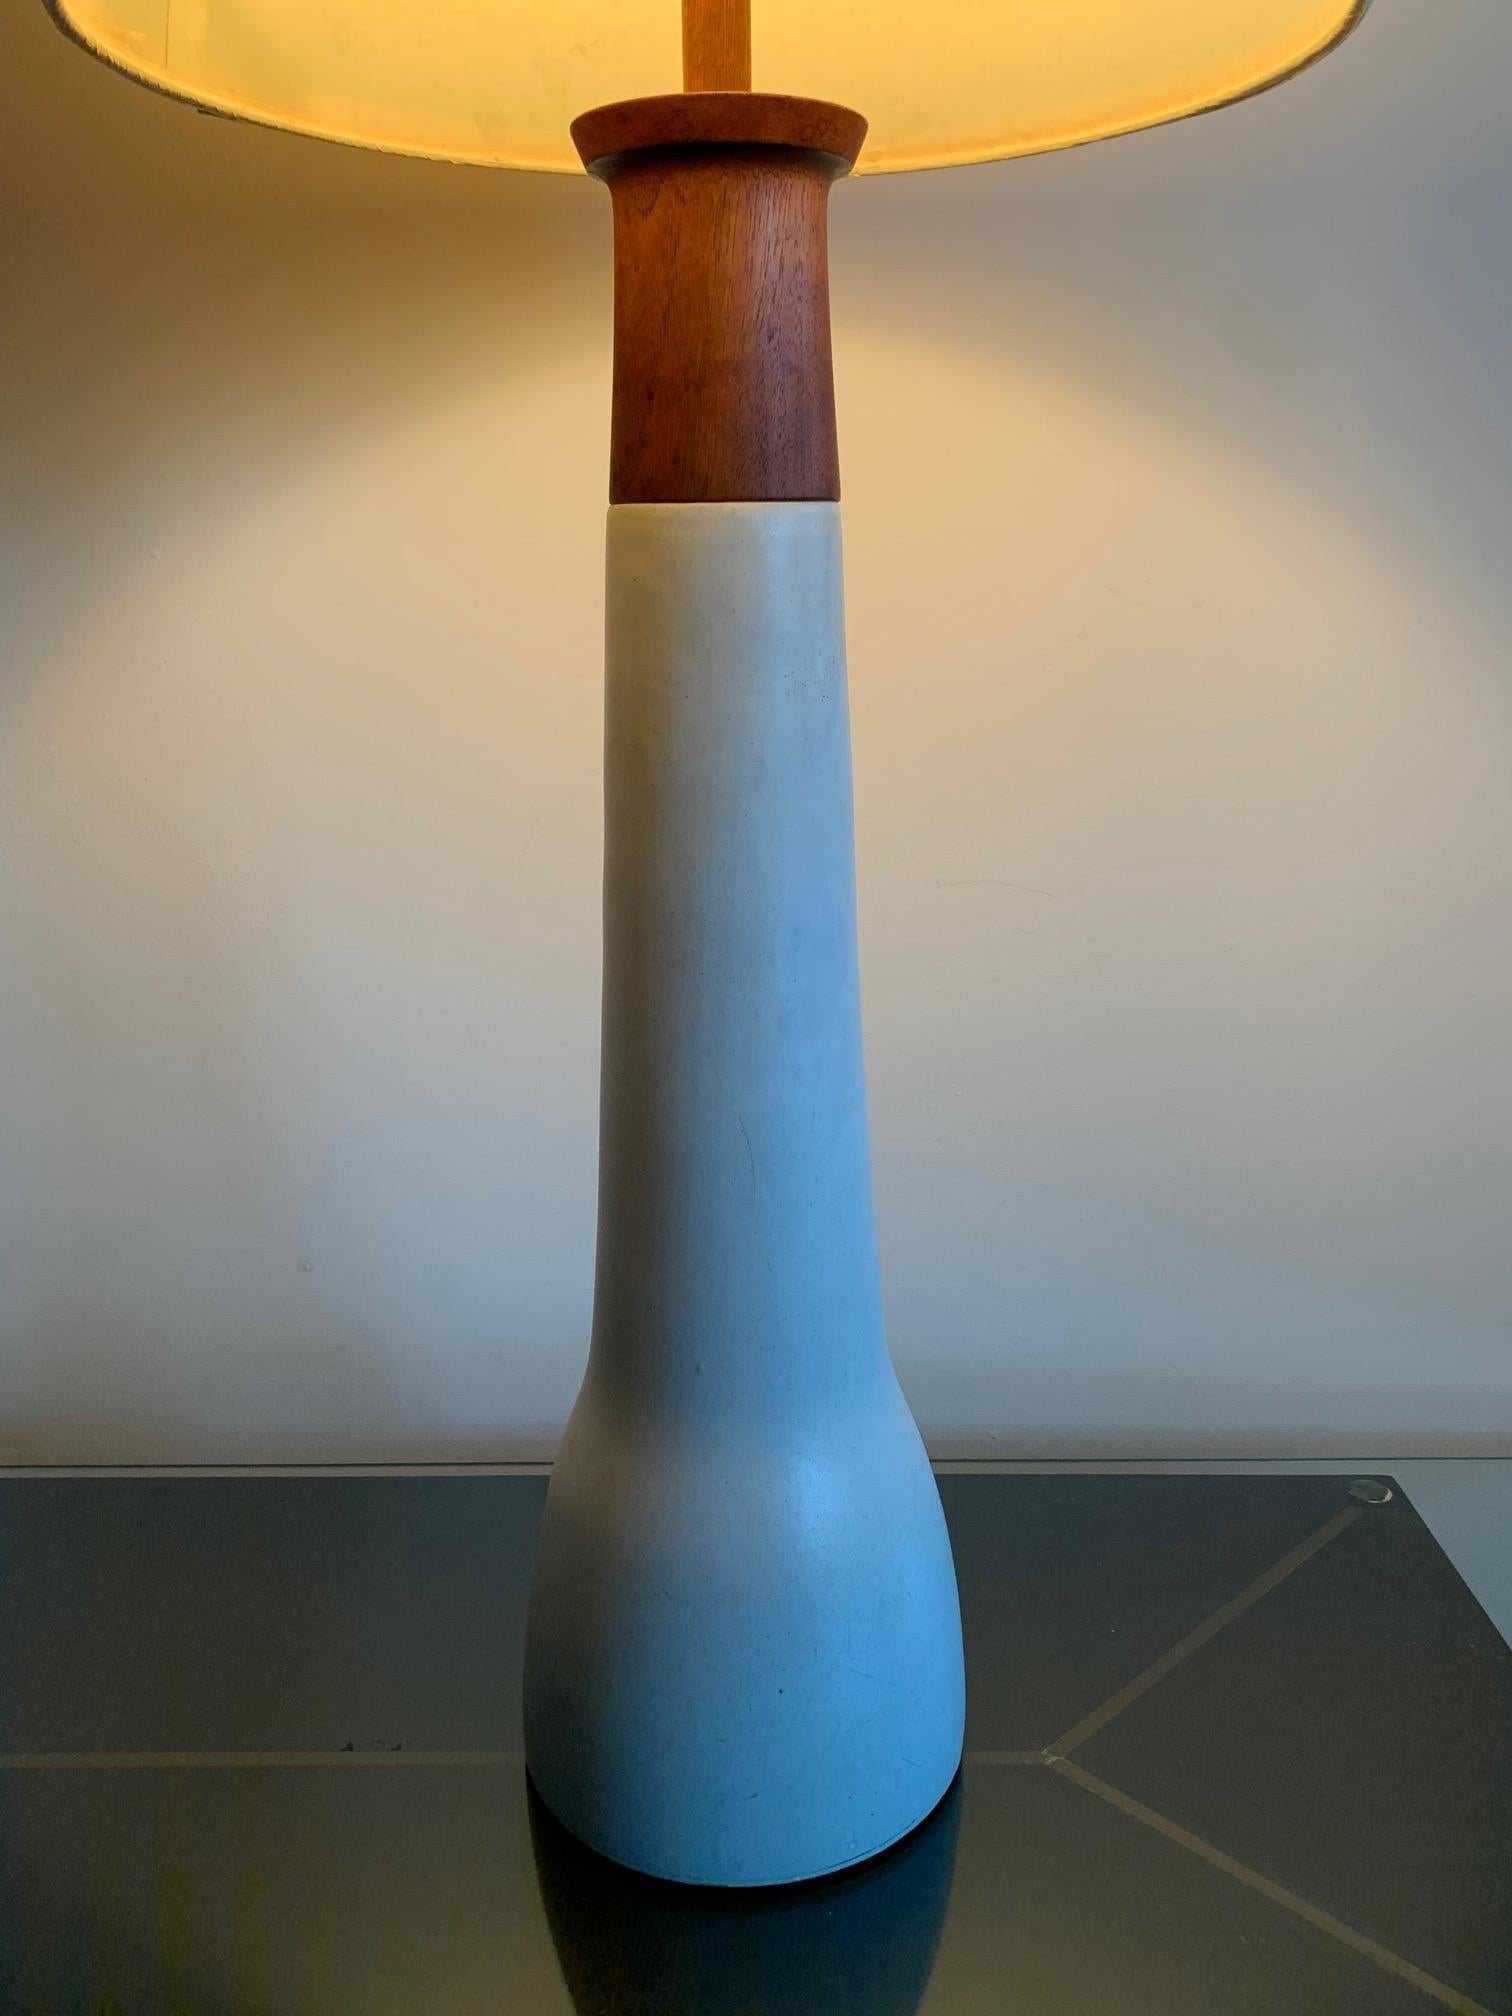 Elegant Ceramic and Walnut Lamp by Martz In Good Condition For Sale In St.Petersburg, FL